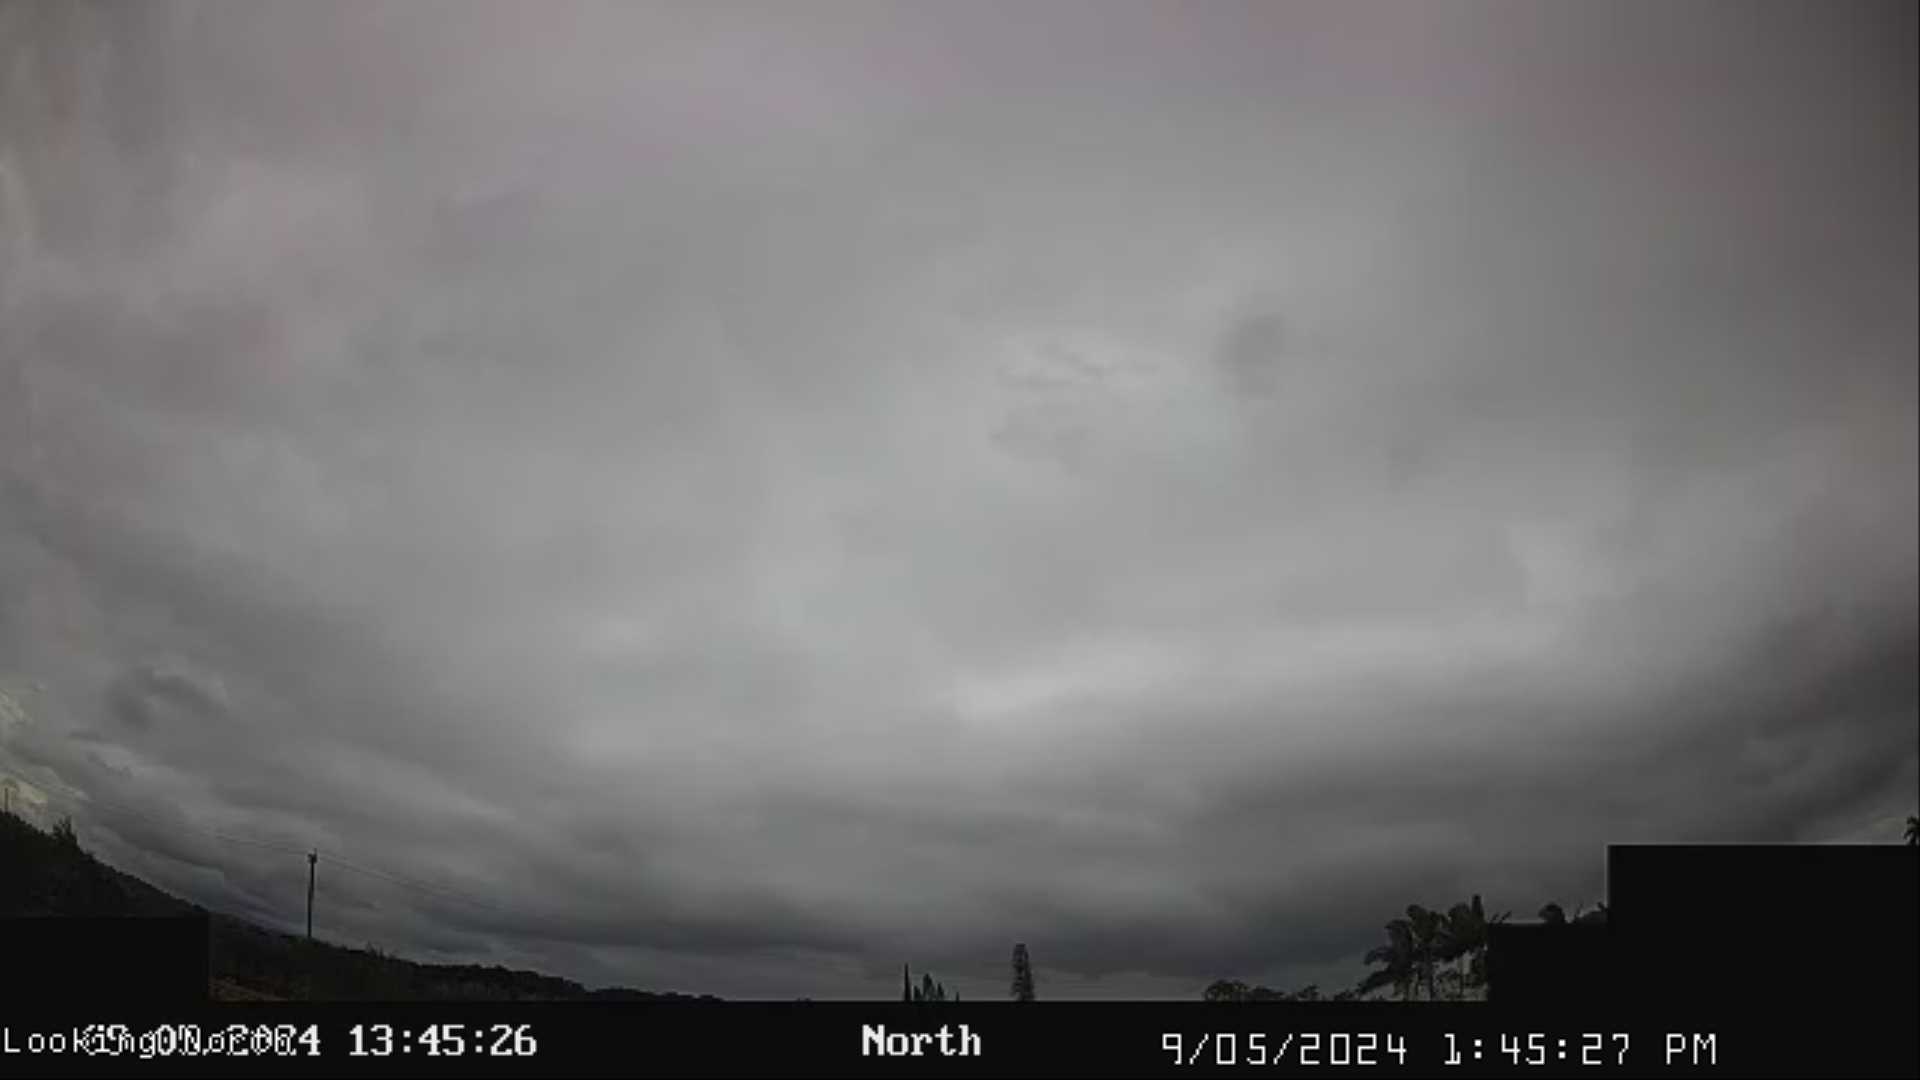 Webcam to the North